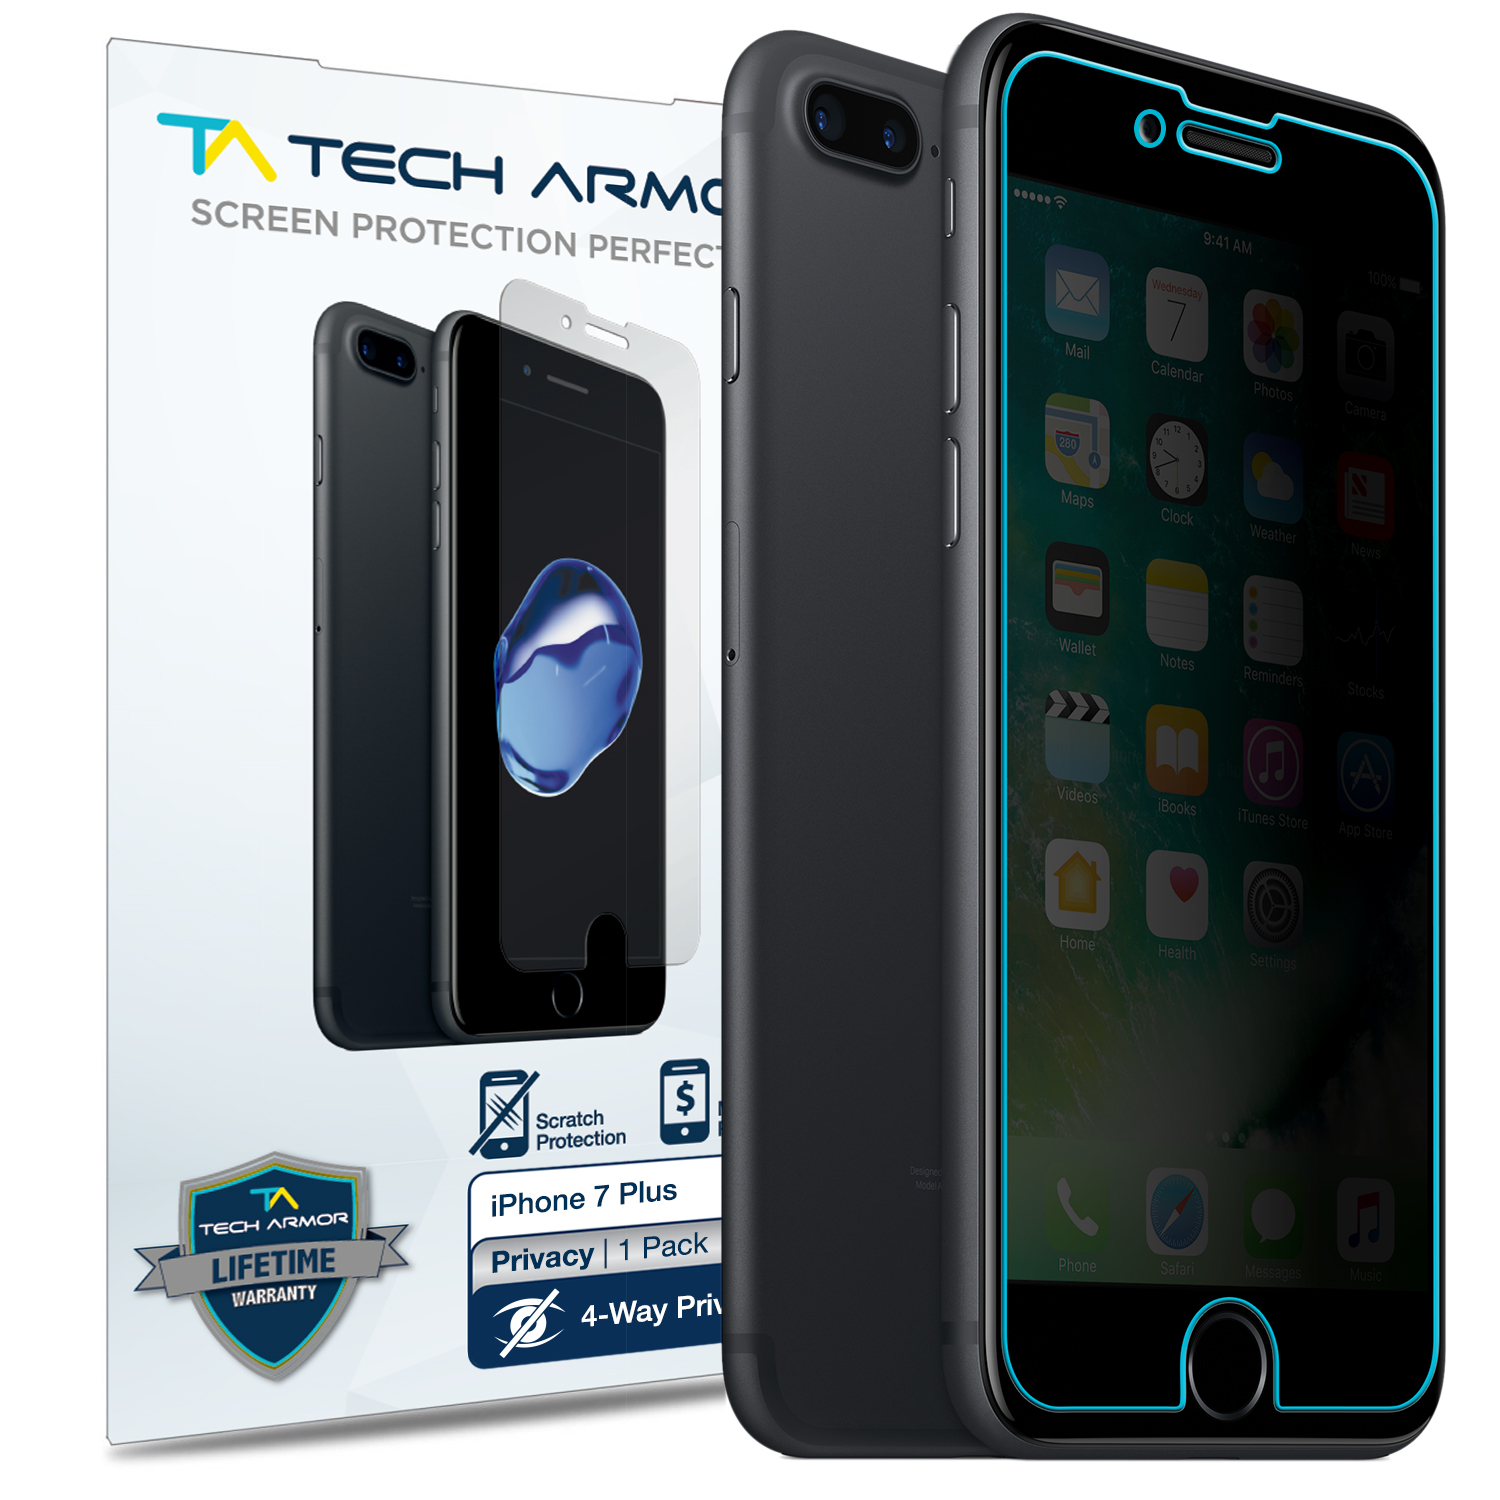 Tech Armor 4way 360 Degree Privacy Film Screen Protector Designed For Apple Iphone 7 Plus And Iphone 8 Plus 5 5 Inch 1 Pack